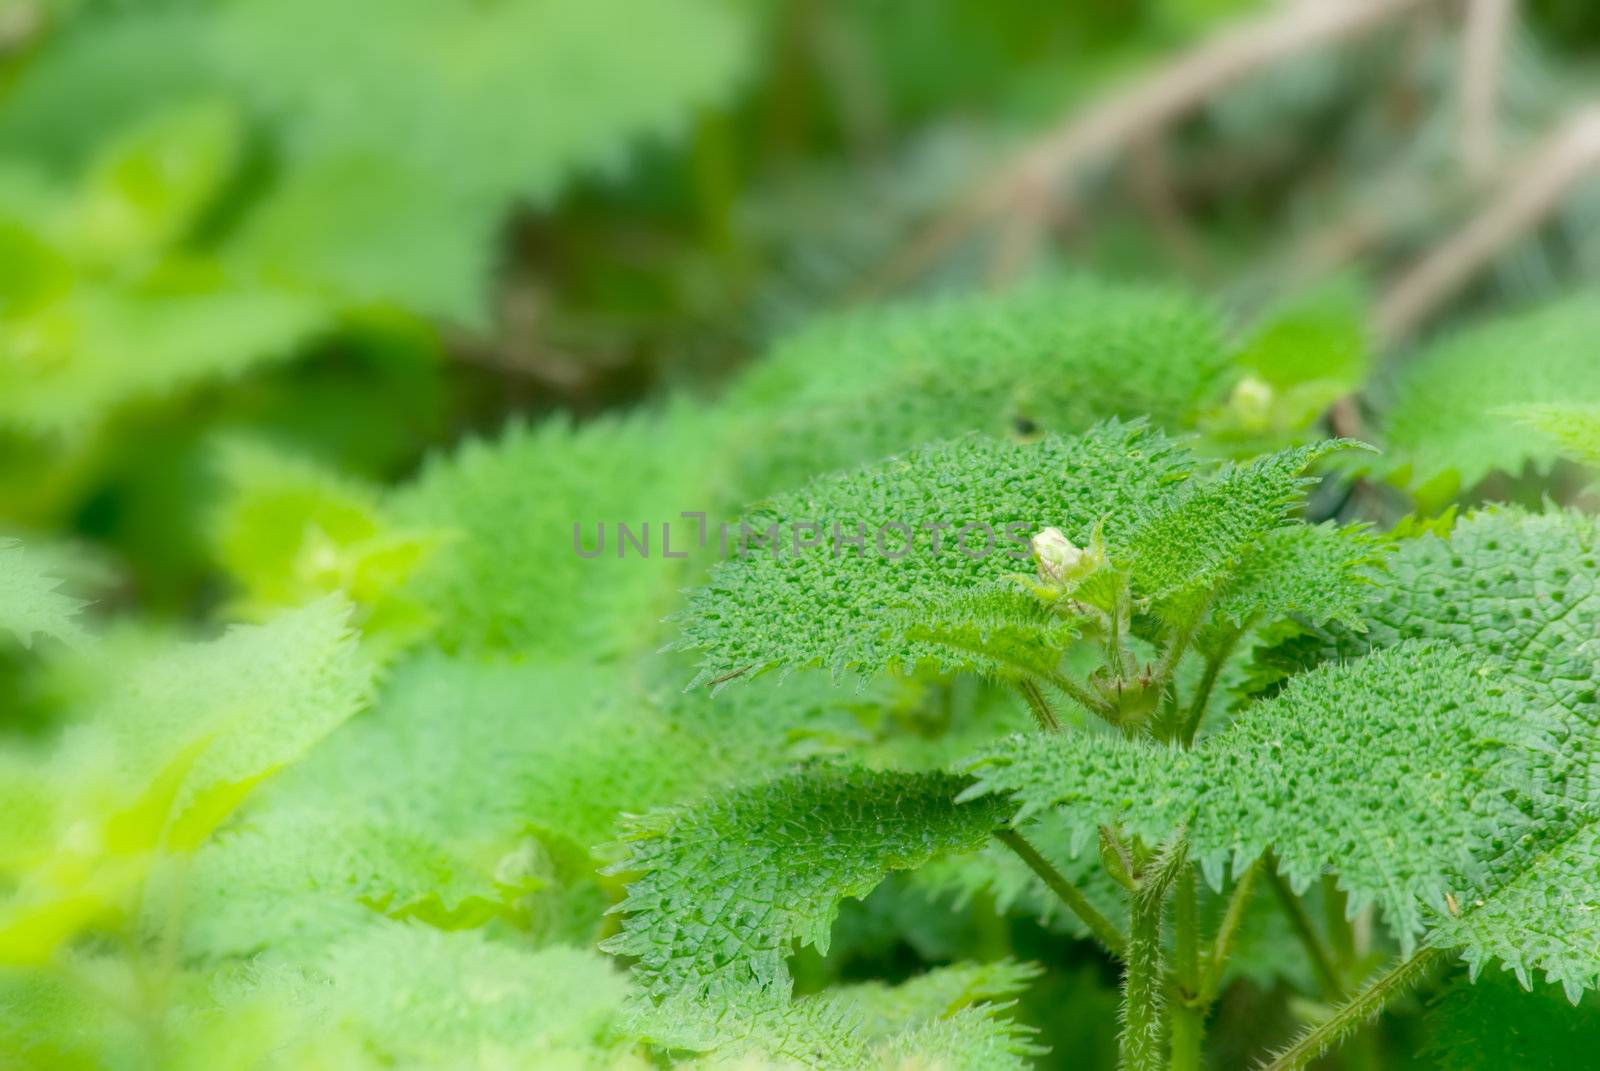 It is a beautiful plant with thorns called Stinging Nettle.